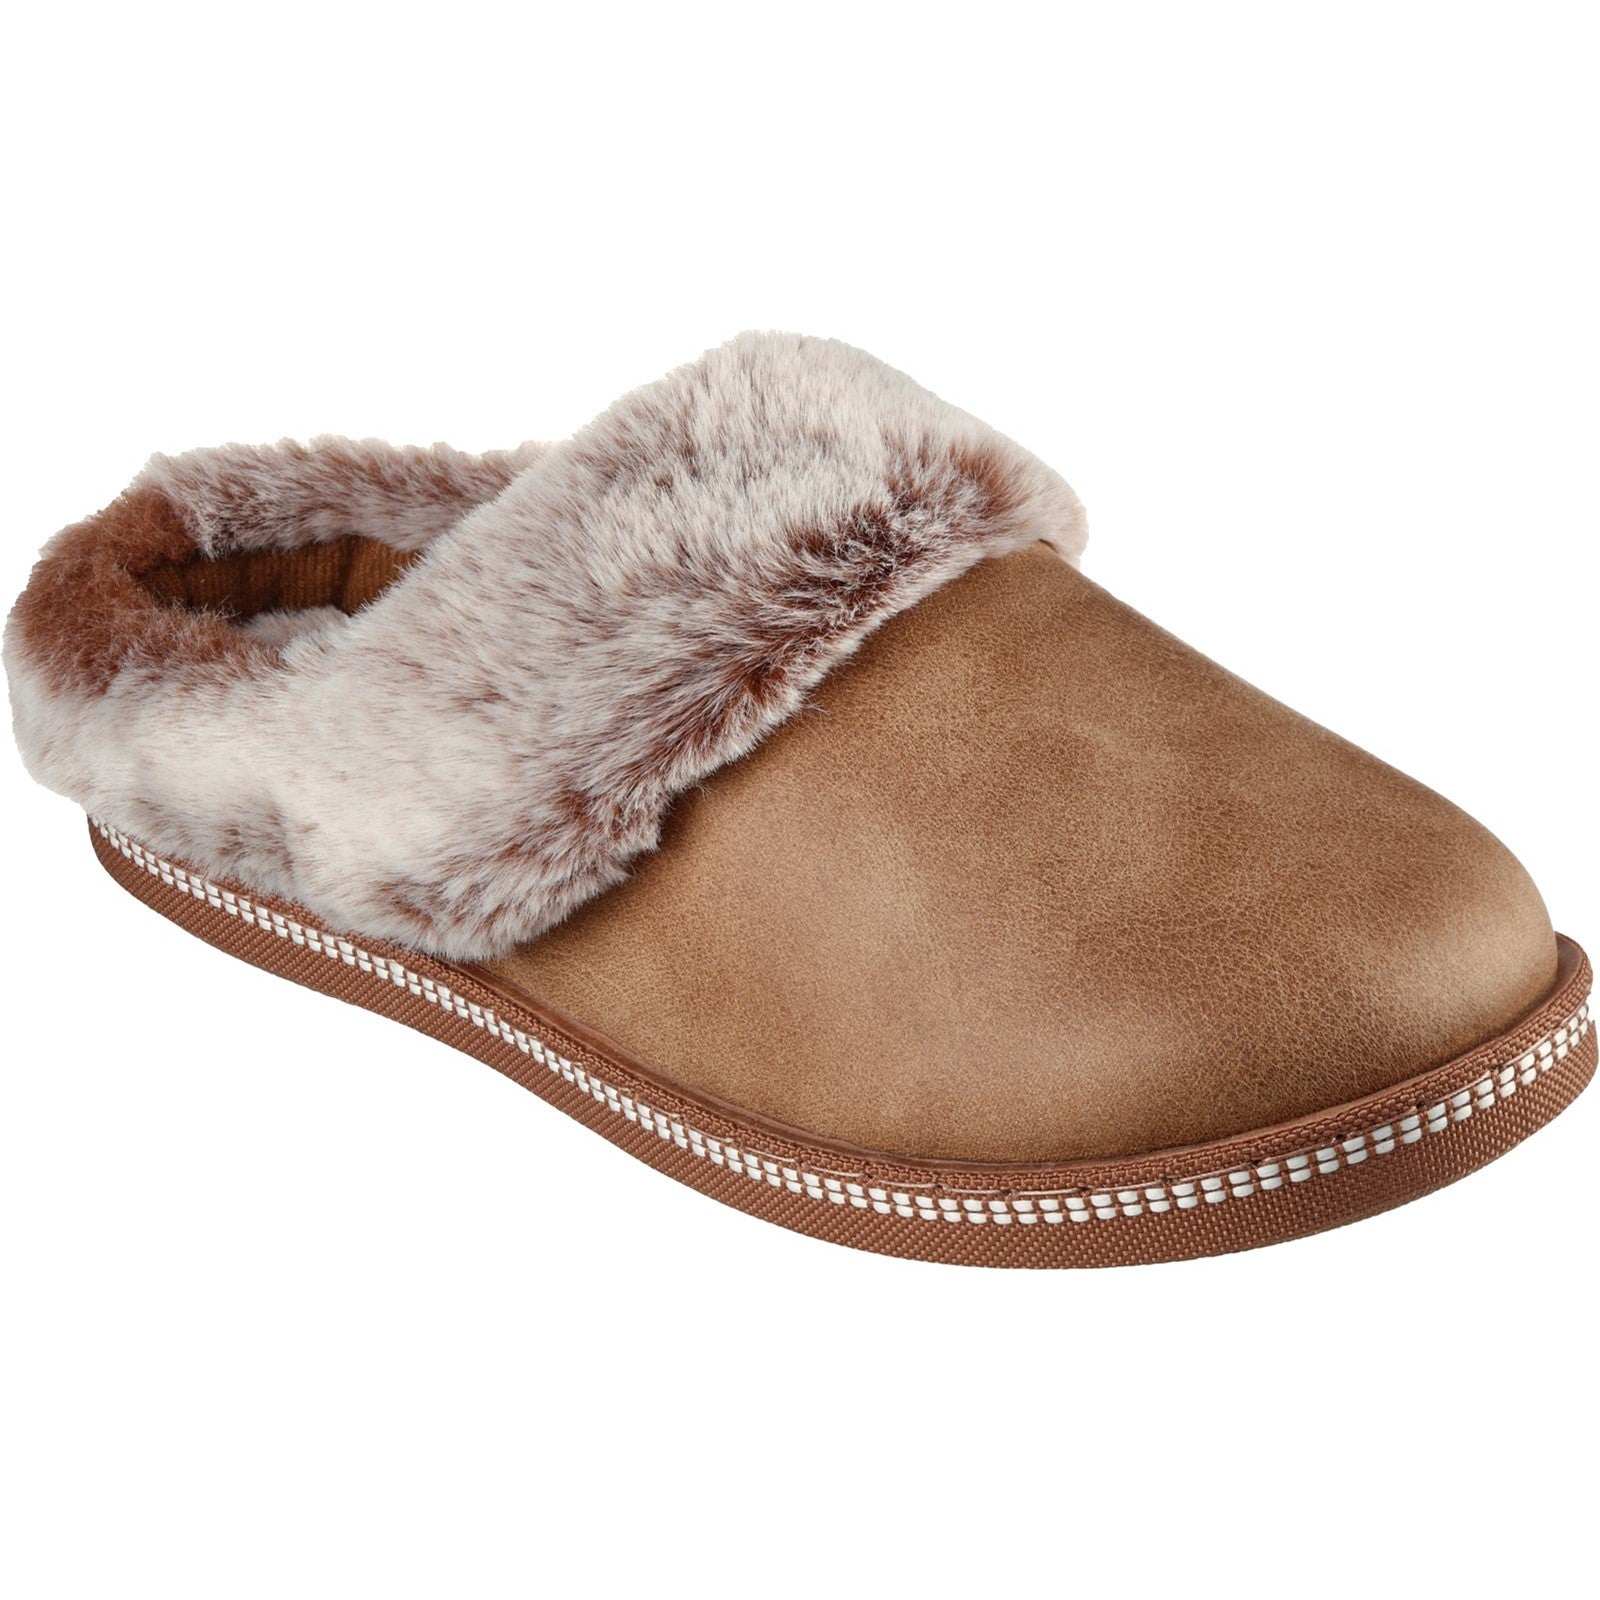 Skechers Cozy Campfire Lovely Life Slippers